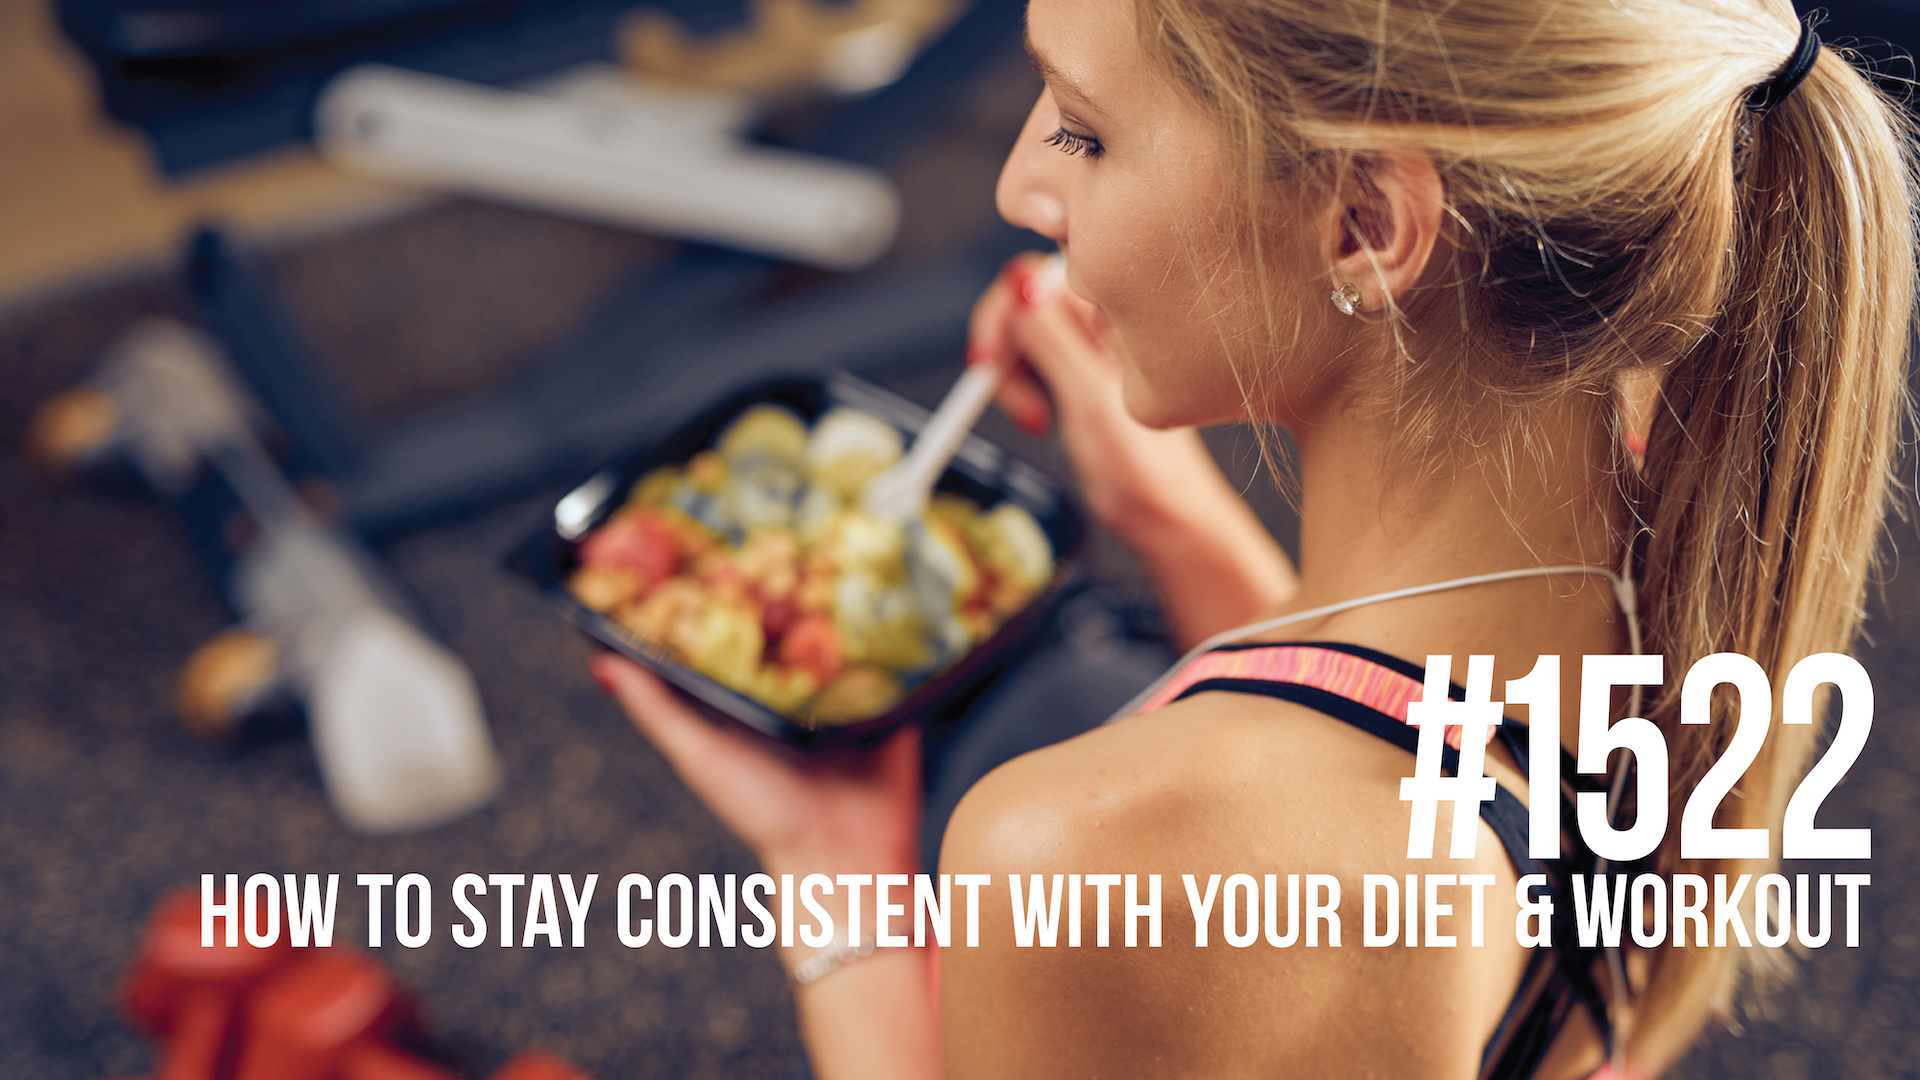 1522: How to Stay Consistent With Your Diet & Workout